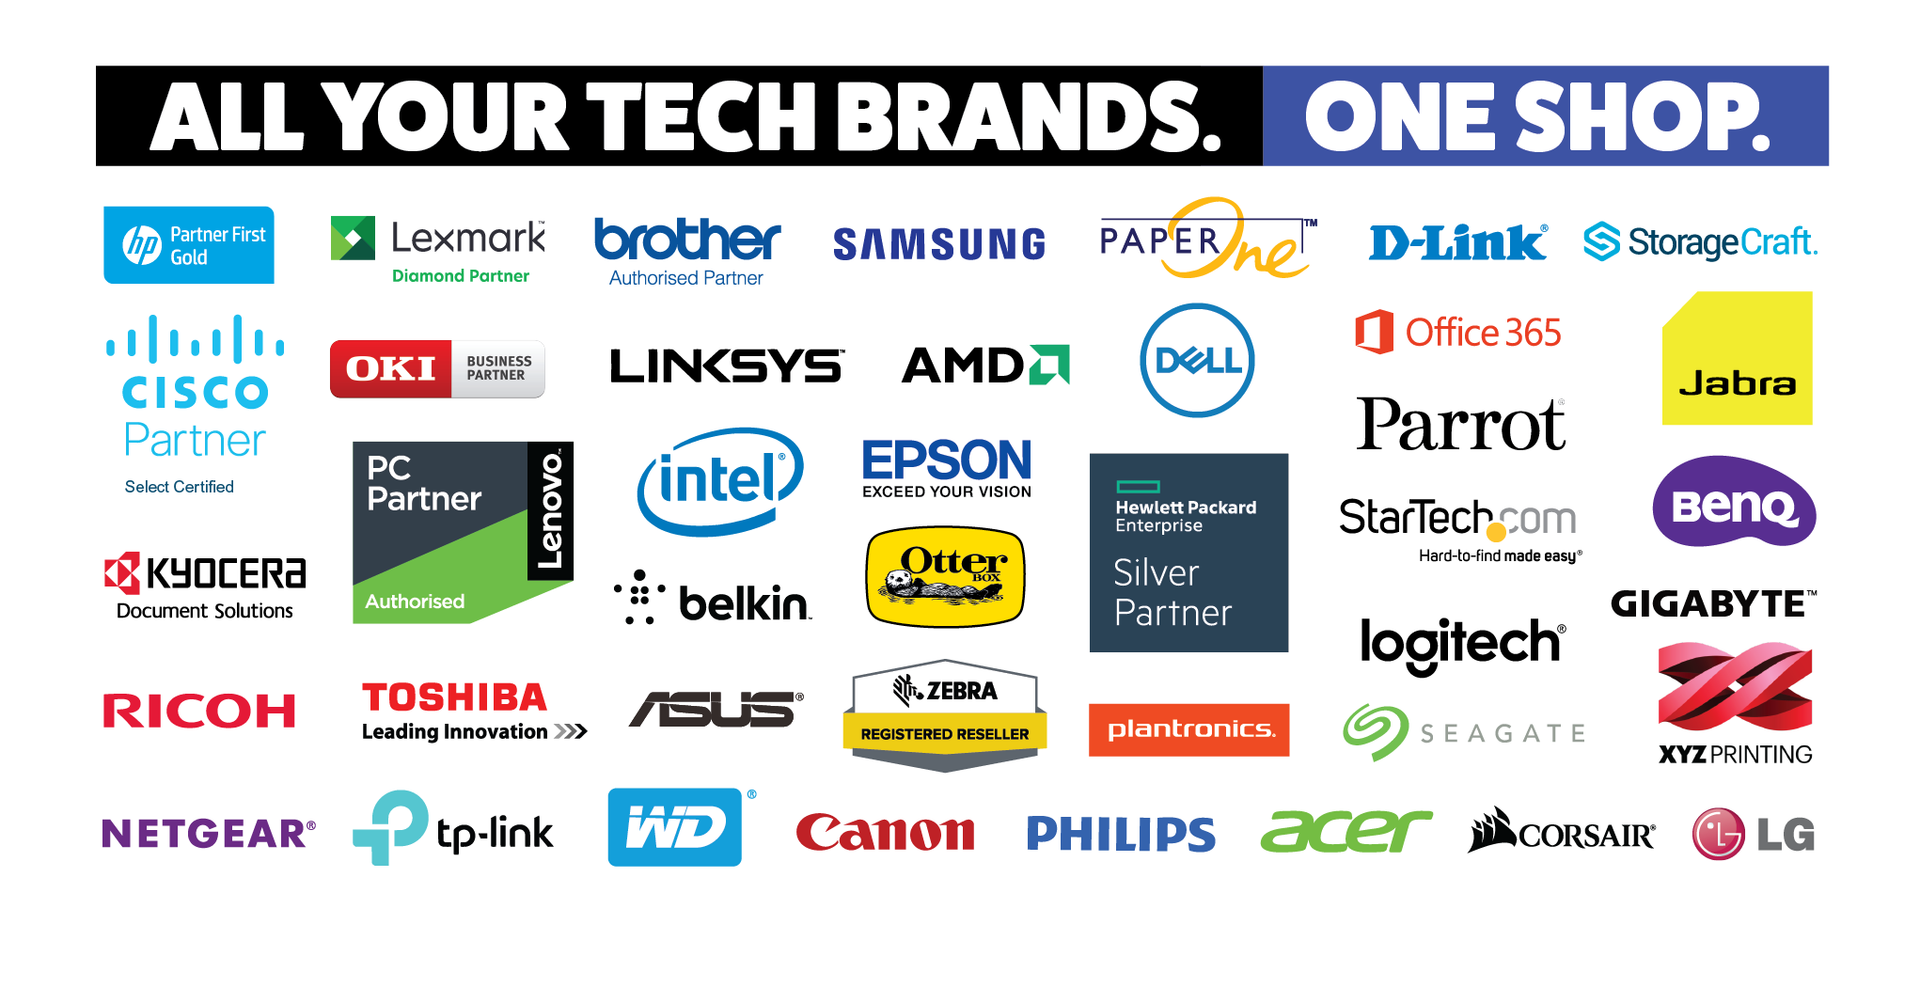 All your tech brands under one shop